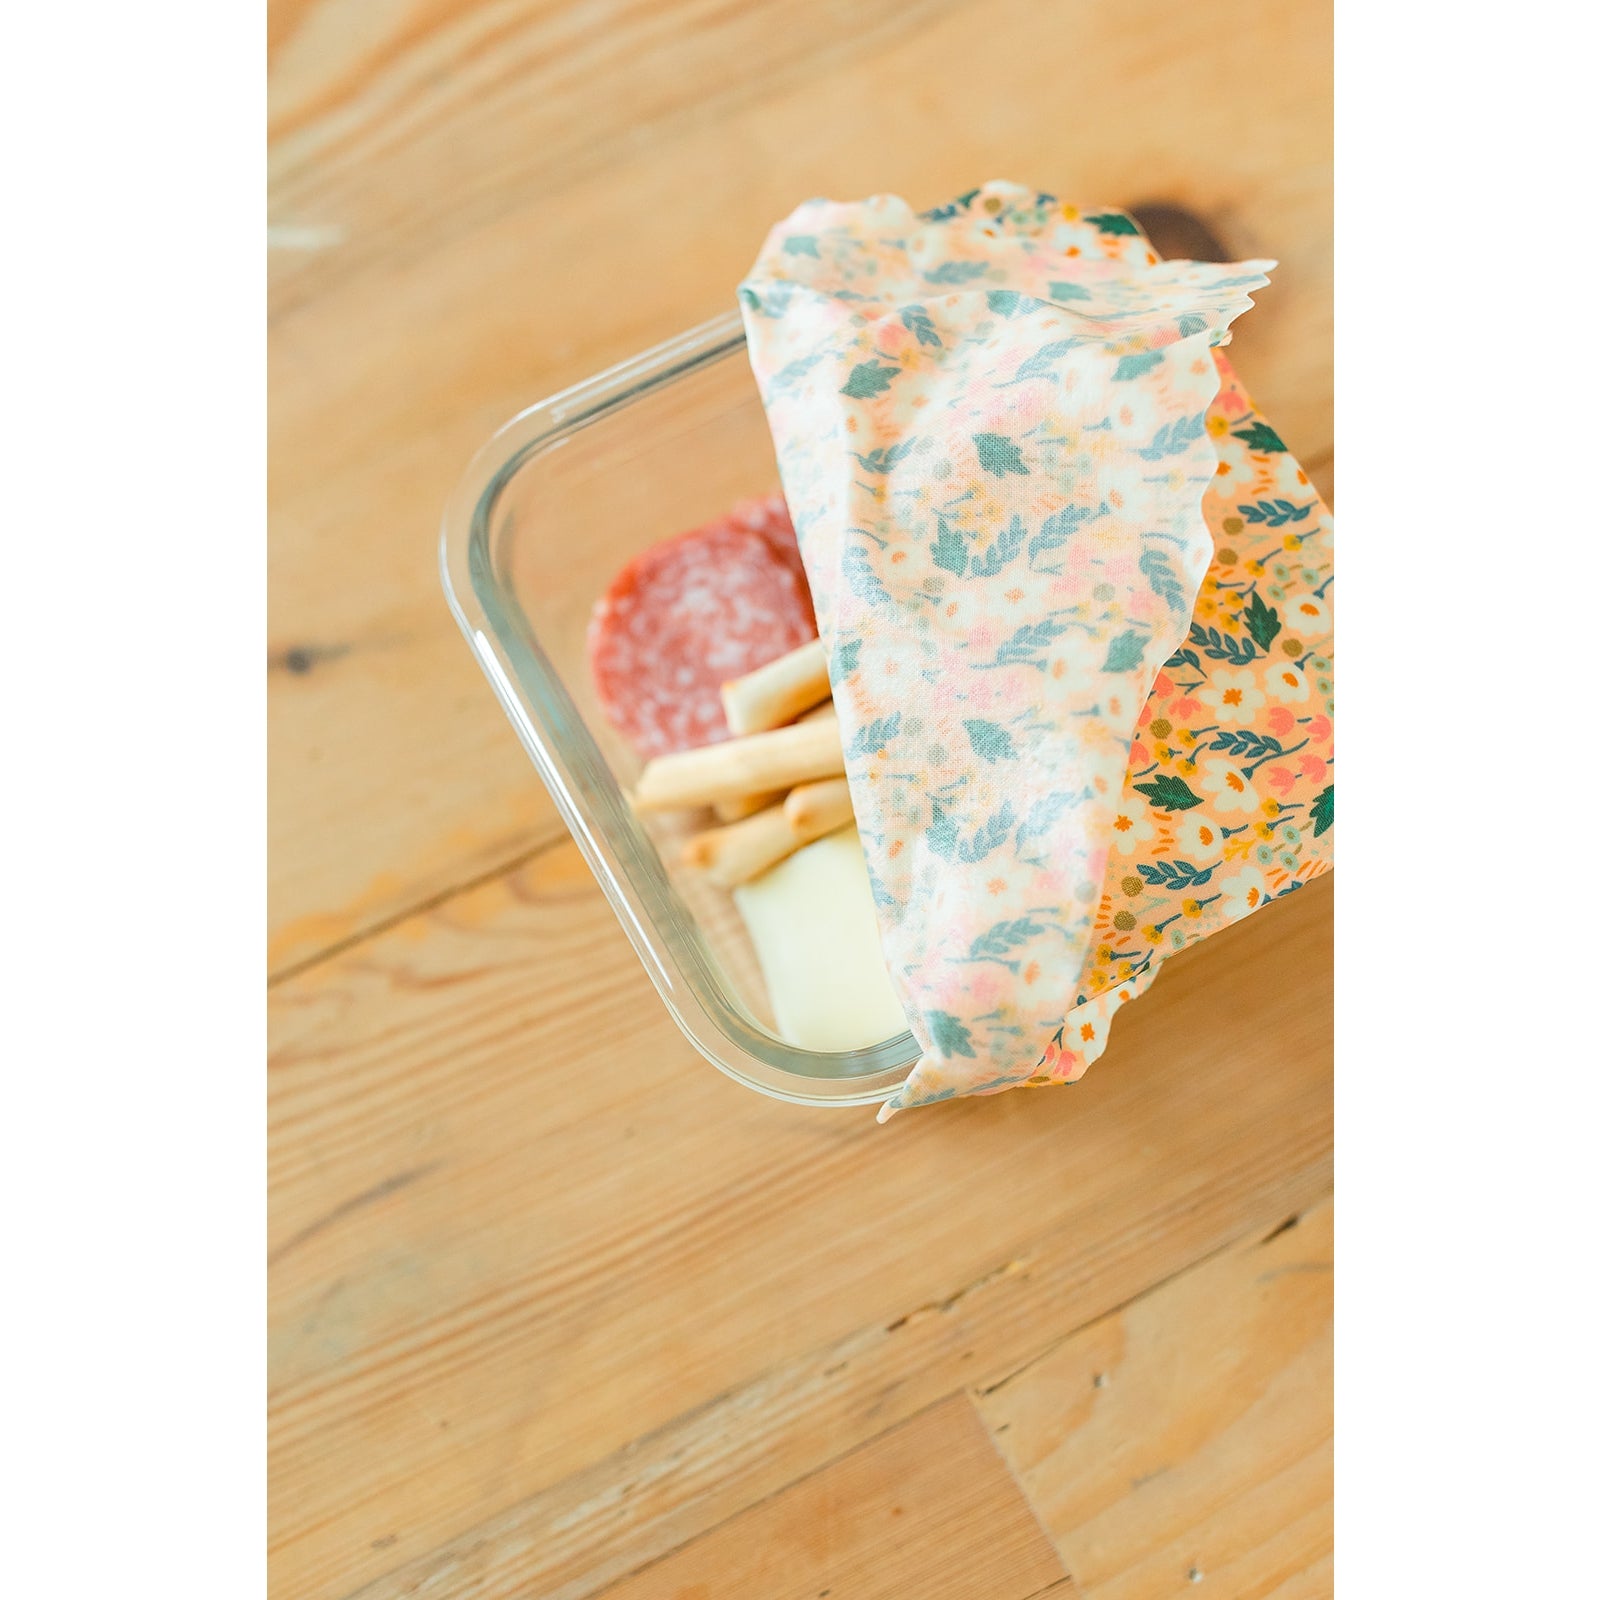 Beeswax Food Wraps - Storm and Sky Shoppe